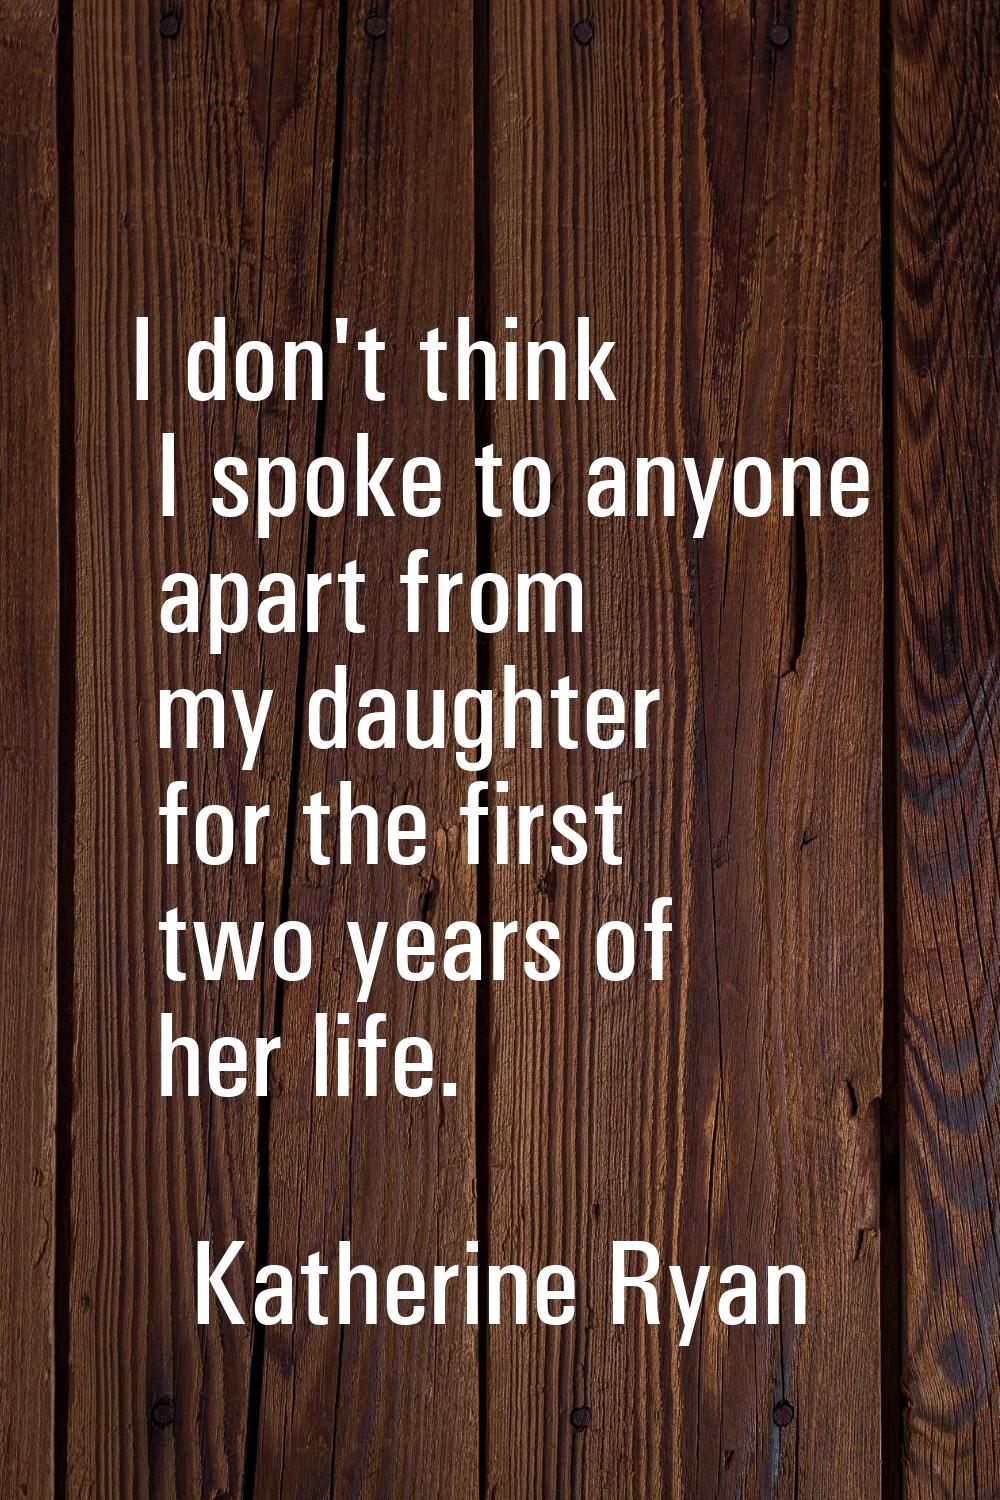 I don't think I spoke to anyone apart from my daughter for the first two years of her life.